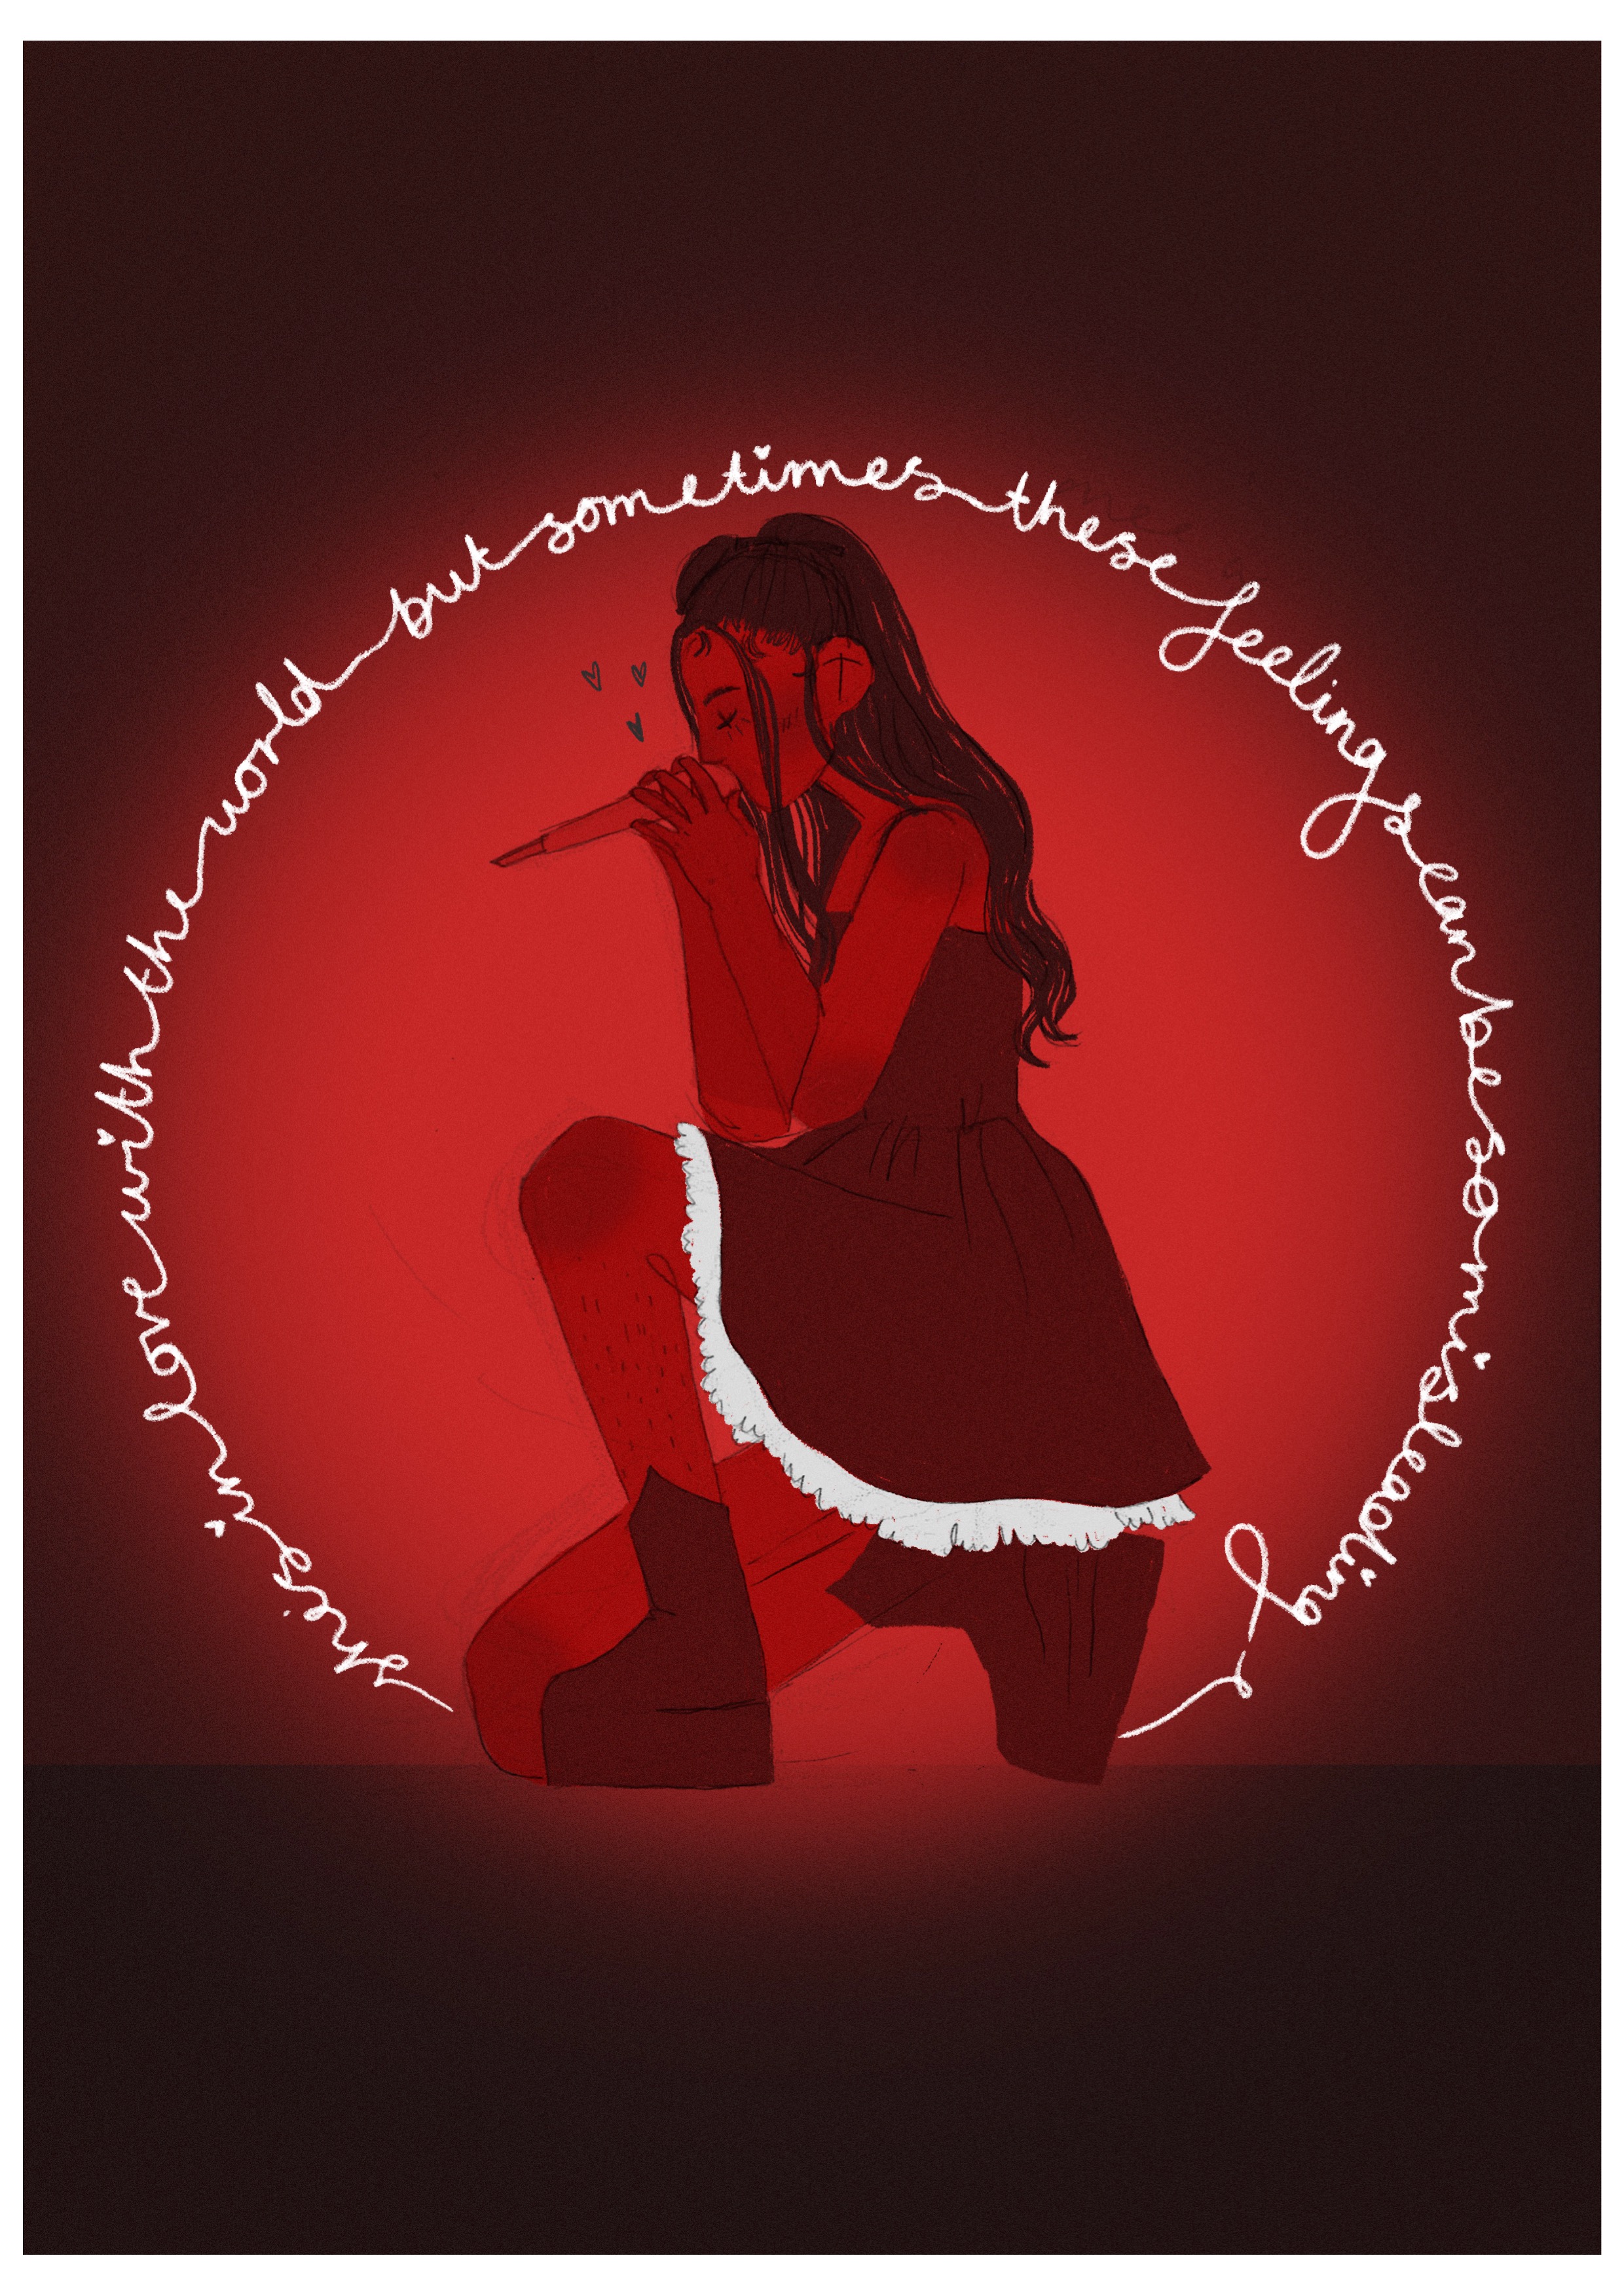 BA Illustration work: a graphic novel page depicting one of the main characters performing, kneeling down on stage singing. The image is red and black toned.